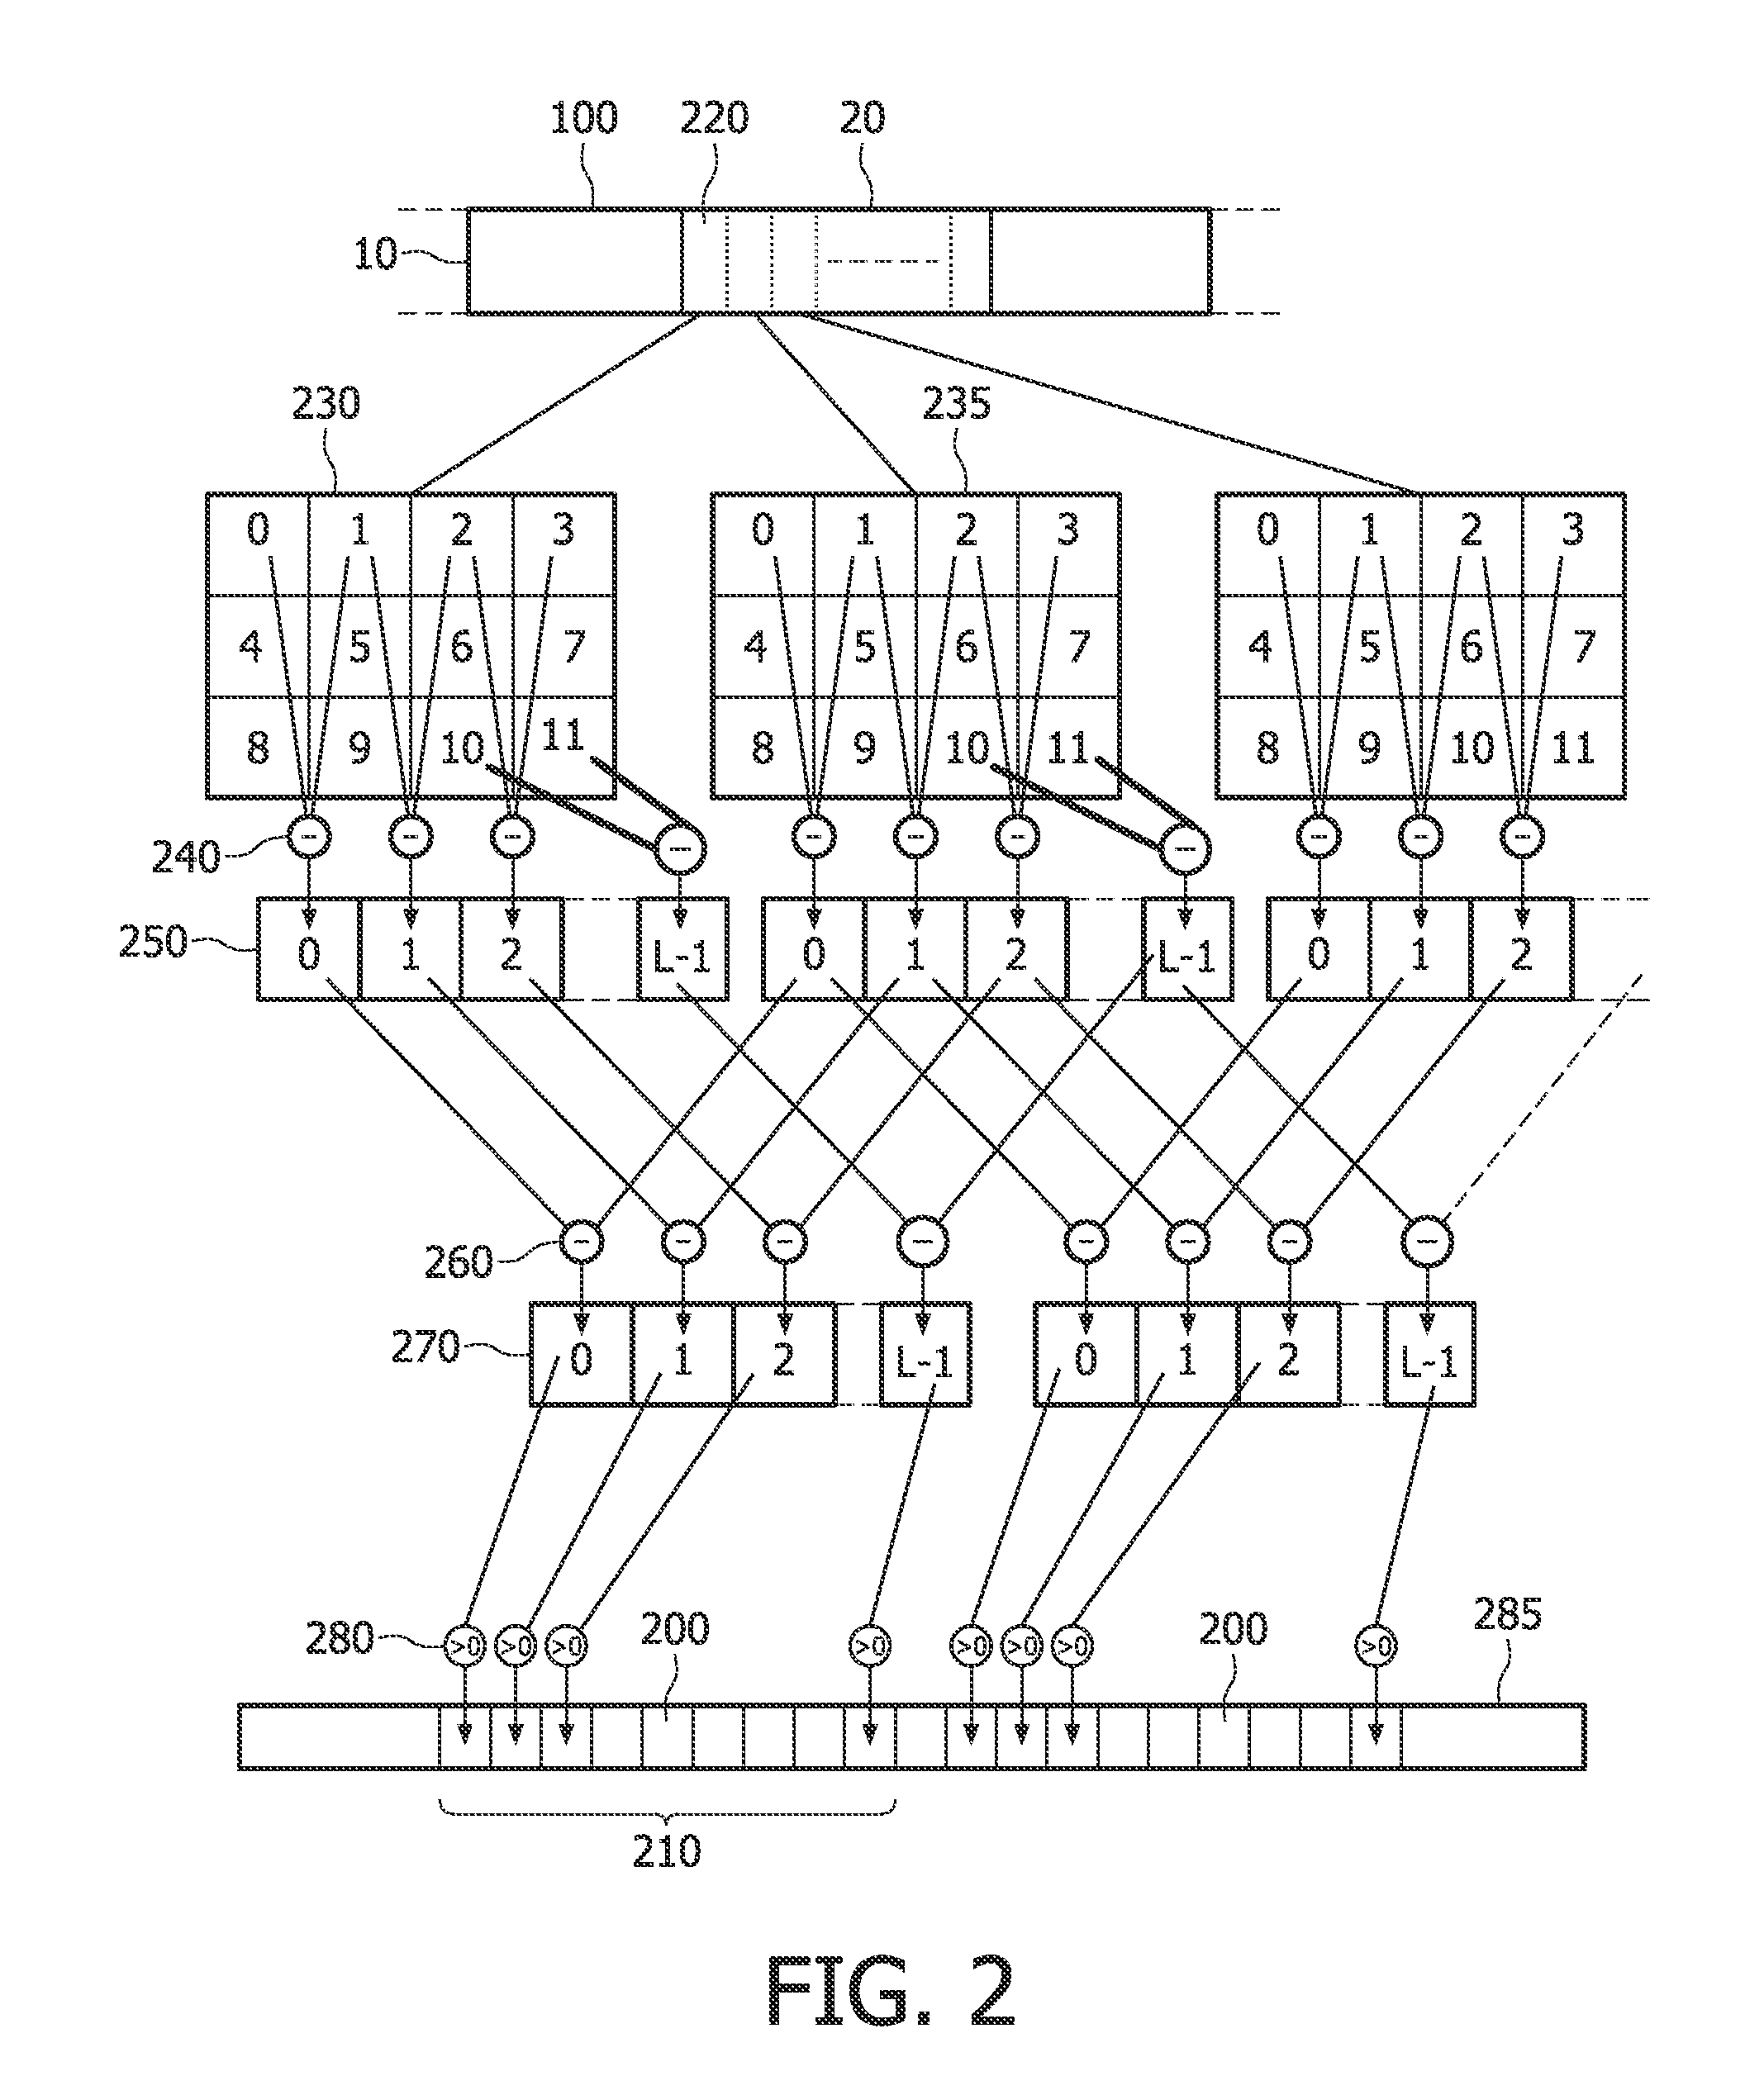 Method for synchronizing a content stream and a script for outputting one or more sensory effects in a multimedia system